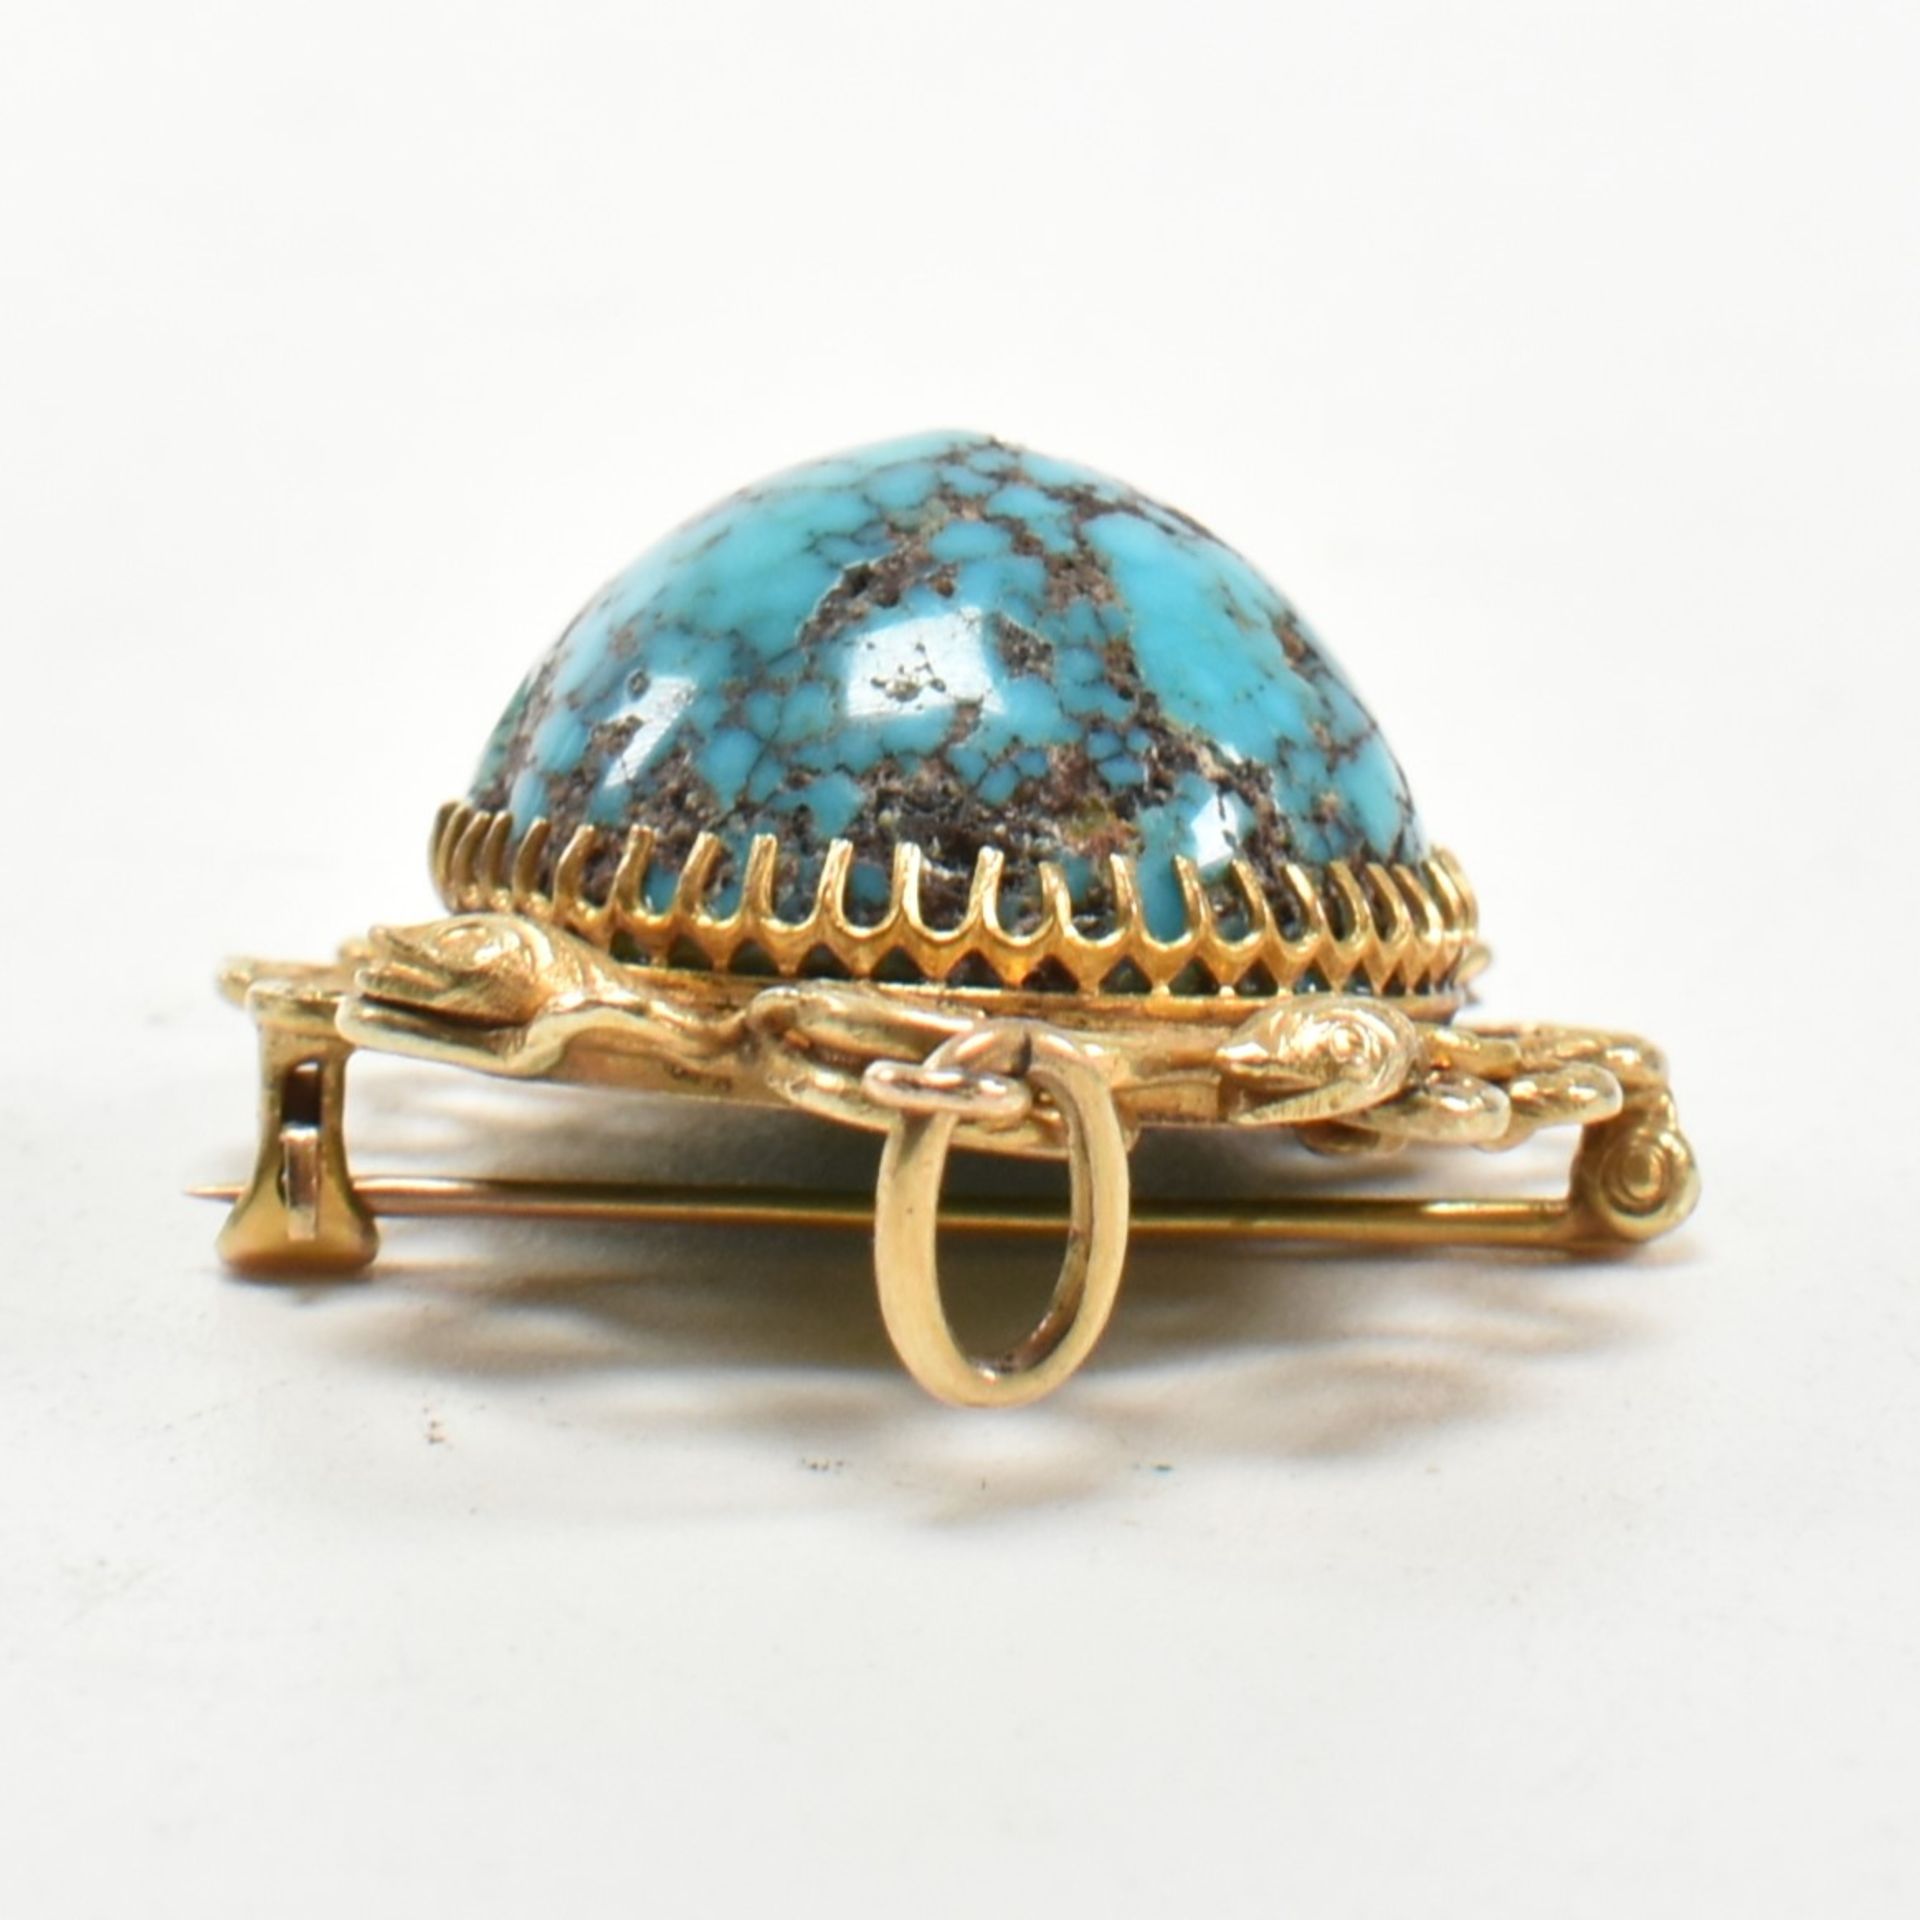 ARTS & CRAFTS GOLD TURQUOISE SNAKE PENDANT BROOCH PIN - Image 5 of 7